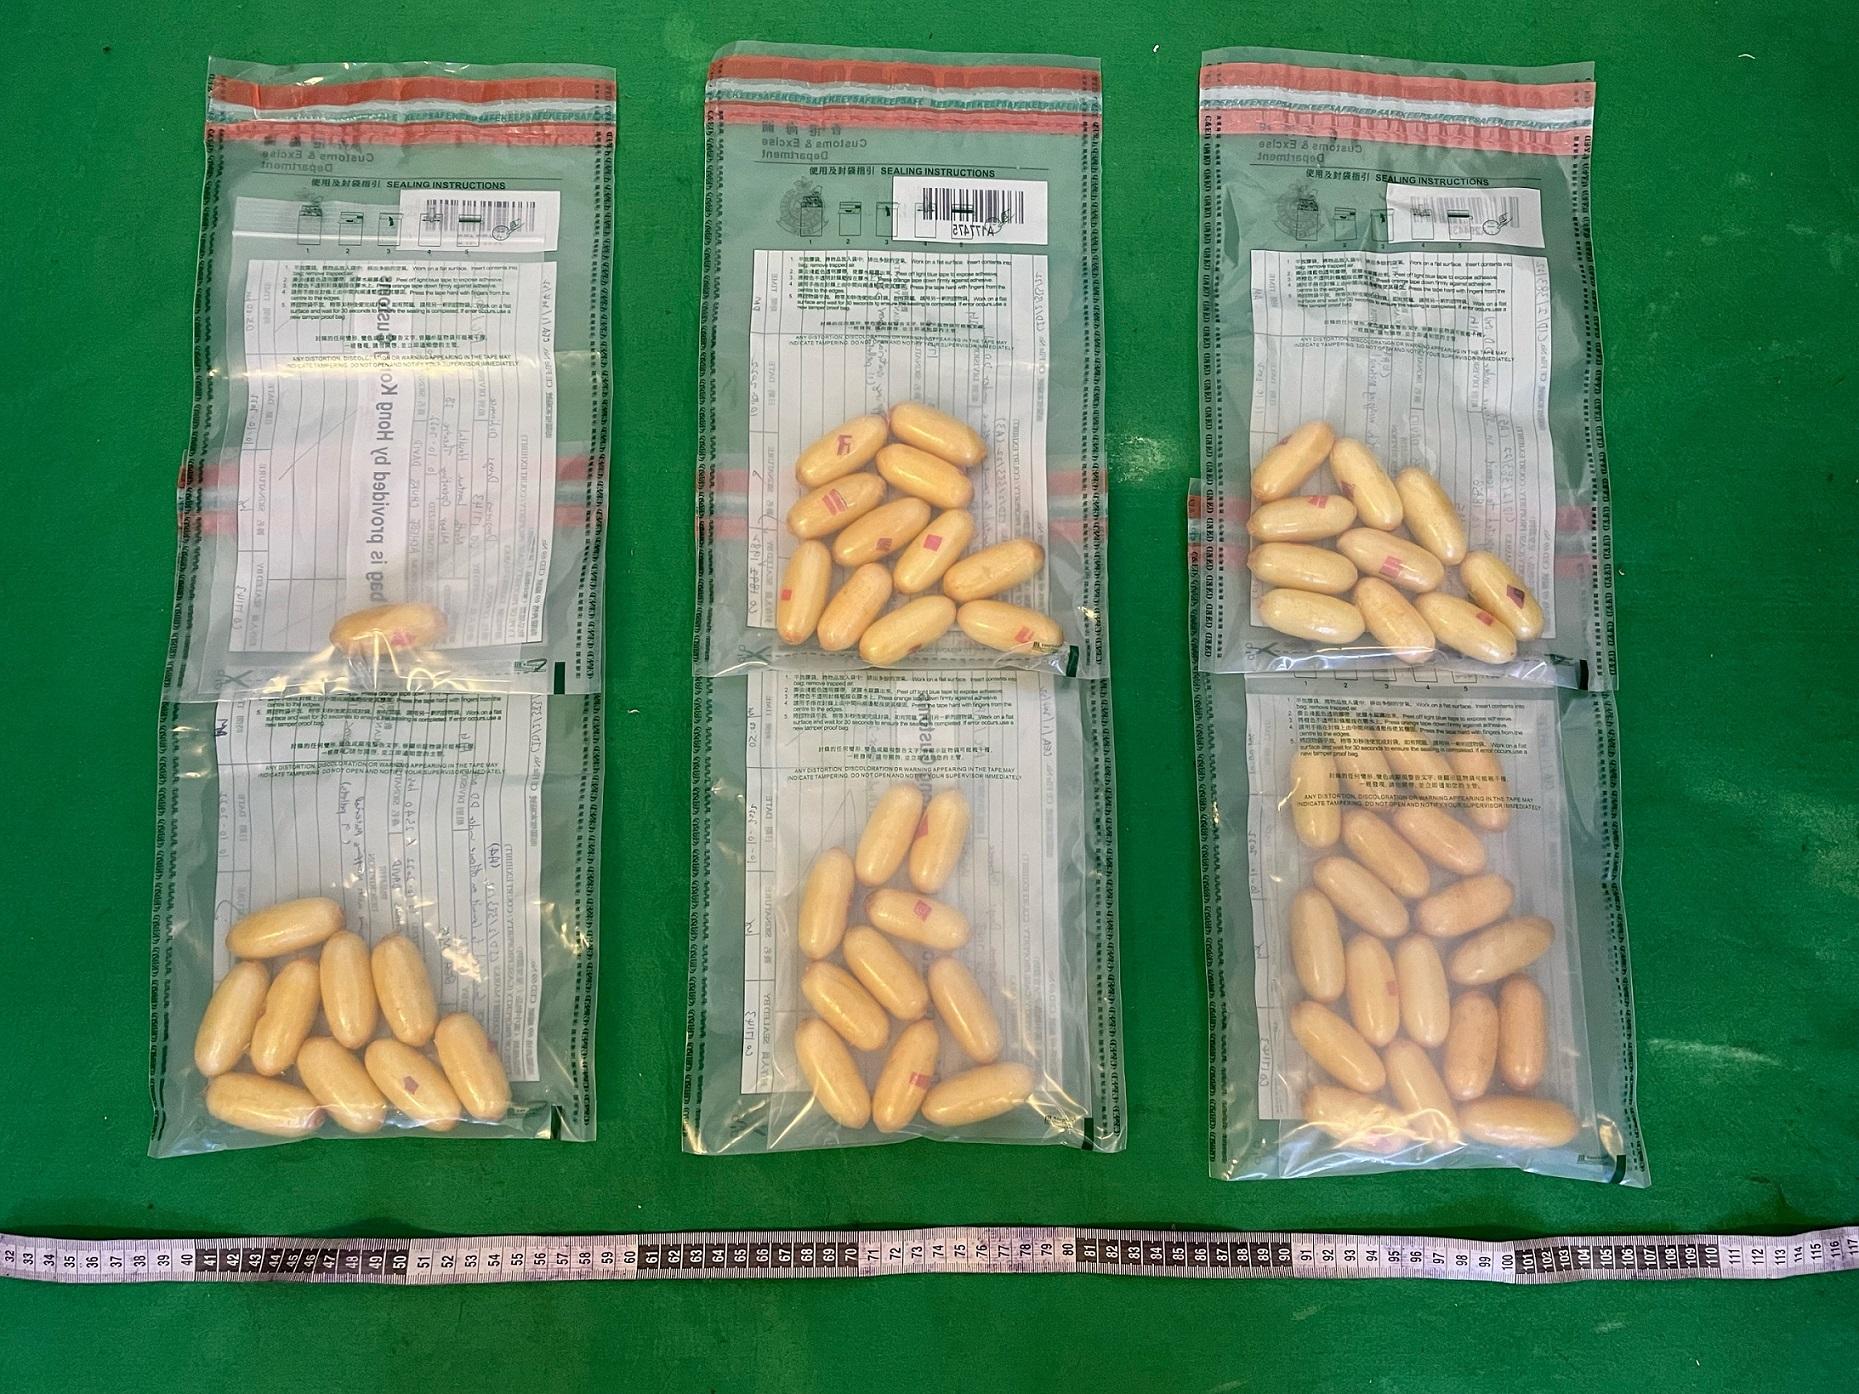 Hong Kong Customs yesterday (October 10) detected a dangerous drugs internal concealment case and seized about 1.2 kilograms of suspected cocaine with an estimated market value of about $1.2 million. Photo shows the suspected cocaine seized.